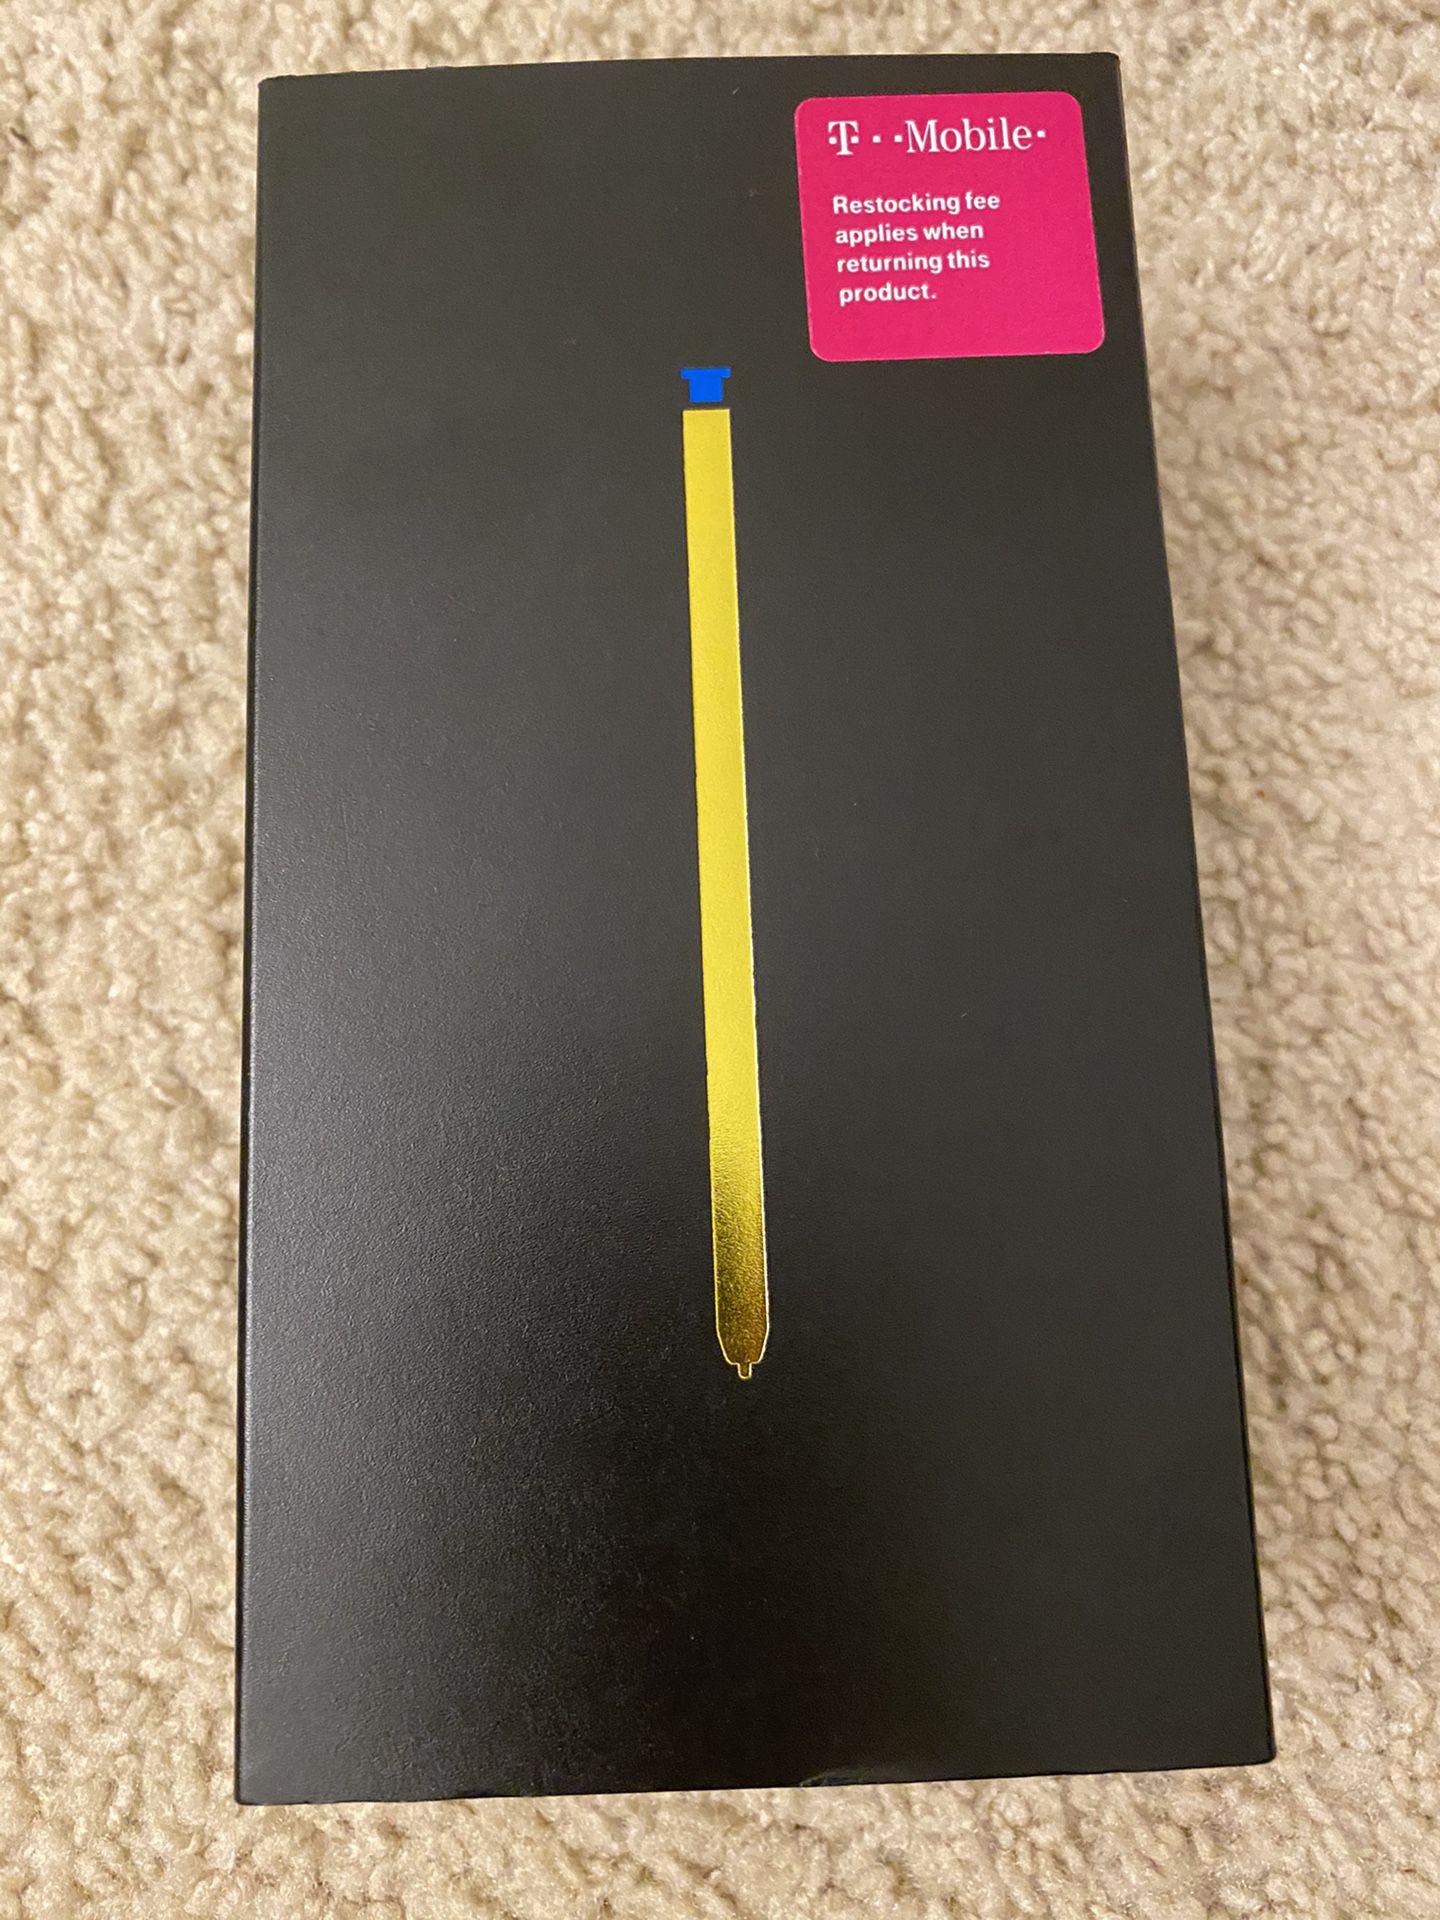 Samsung Galaxy Note 9 (T-Mobile)